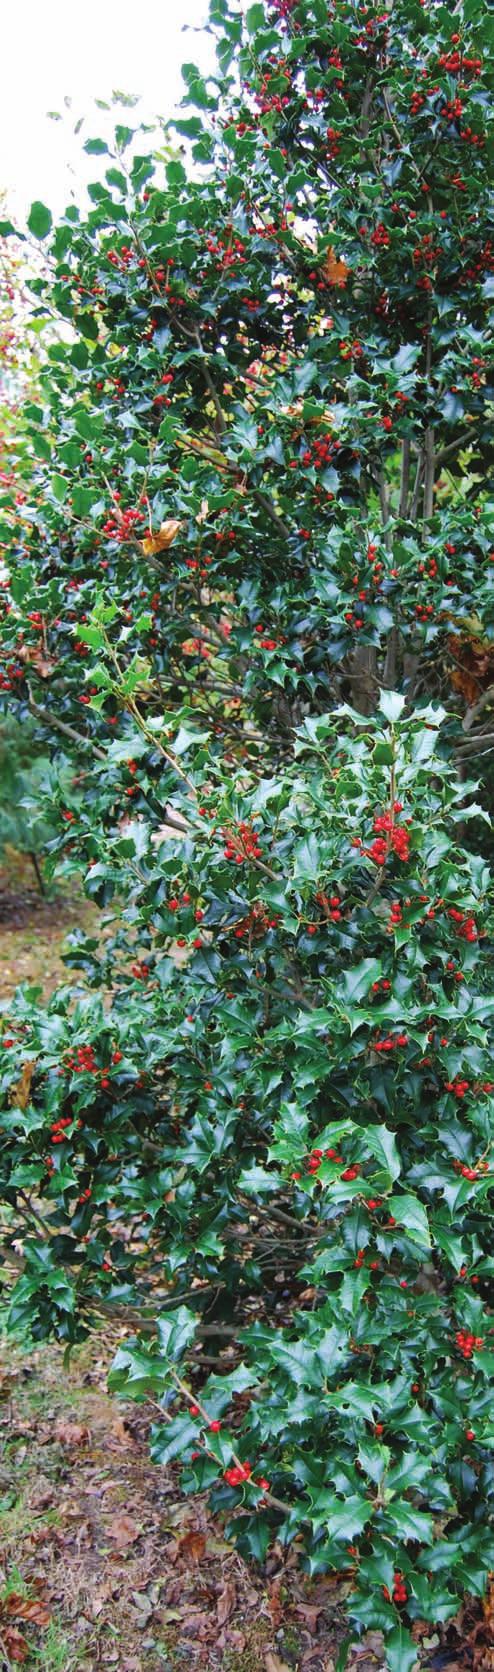 Cannon s interest in plants began at an early age. His father was both a florist and a horticulturalist, who planted the beginnings of the expansive holly collection on Route 6A decades ago.